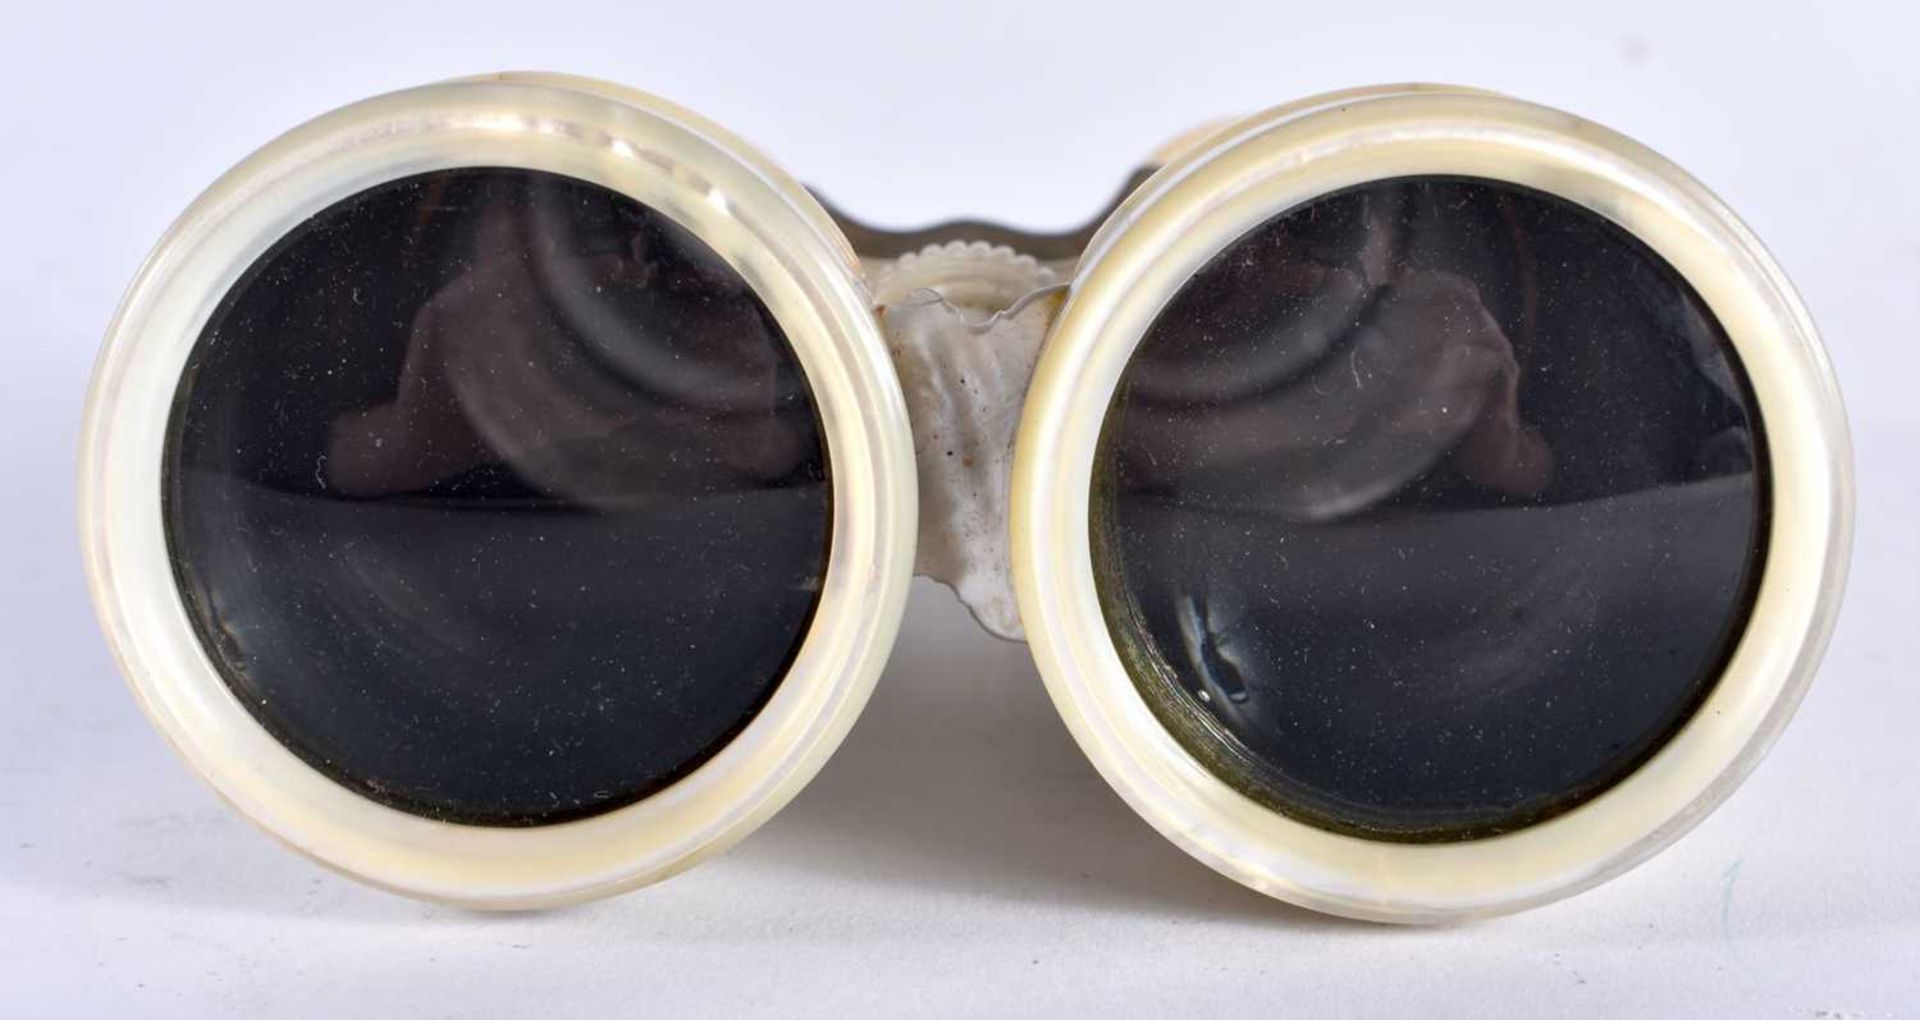 A FINE LARGE PAIR OF FULL MOTHER OF PEARL NEGRETTI & ZAMBRA OPERA GLASSES of exceptional quality. 14 - Image 7 of 7